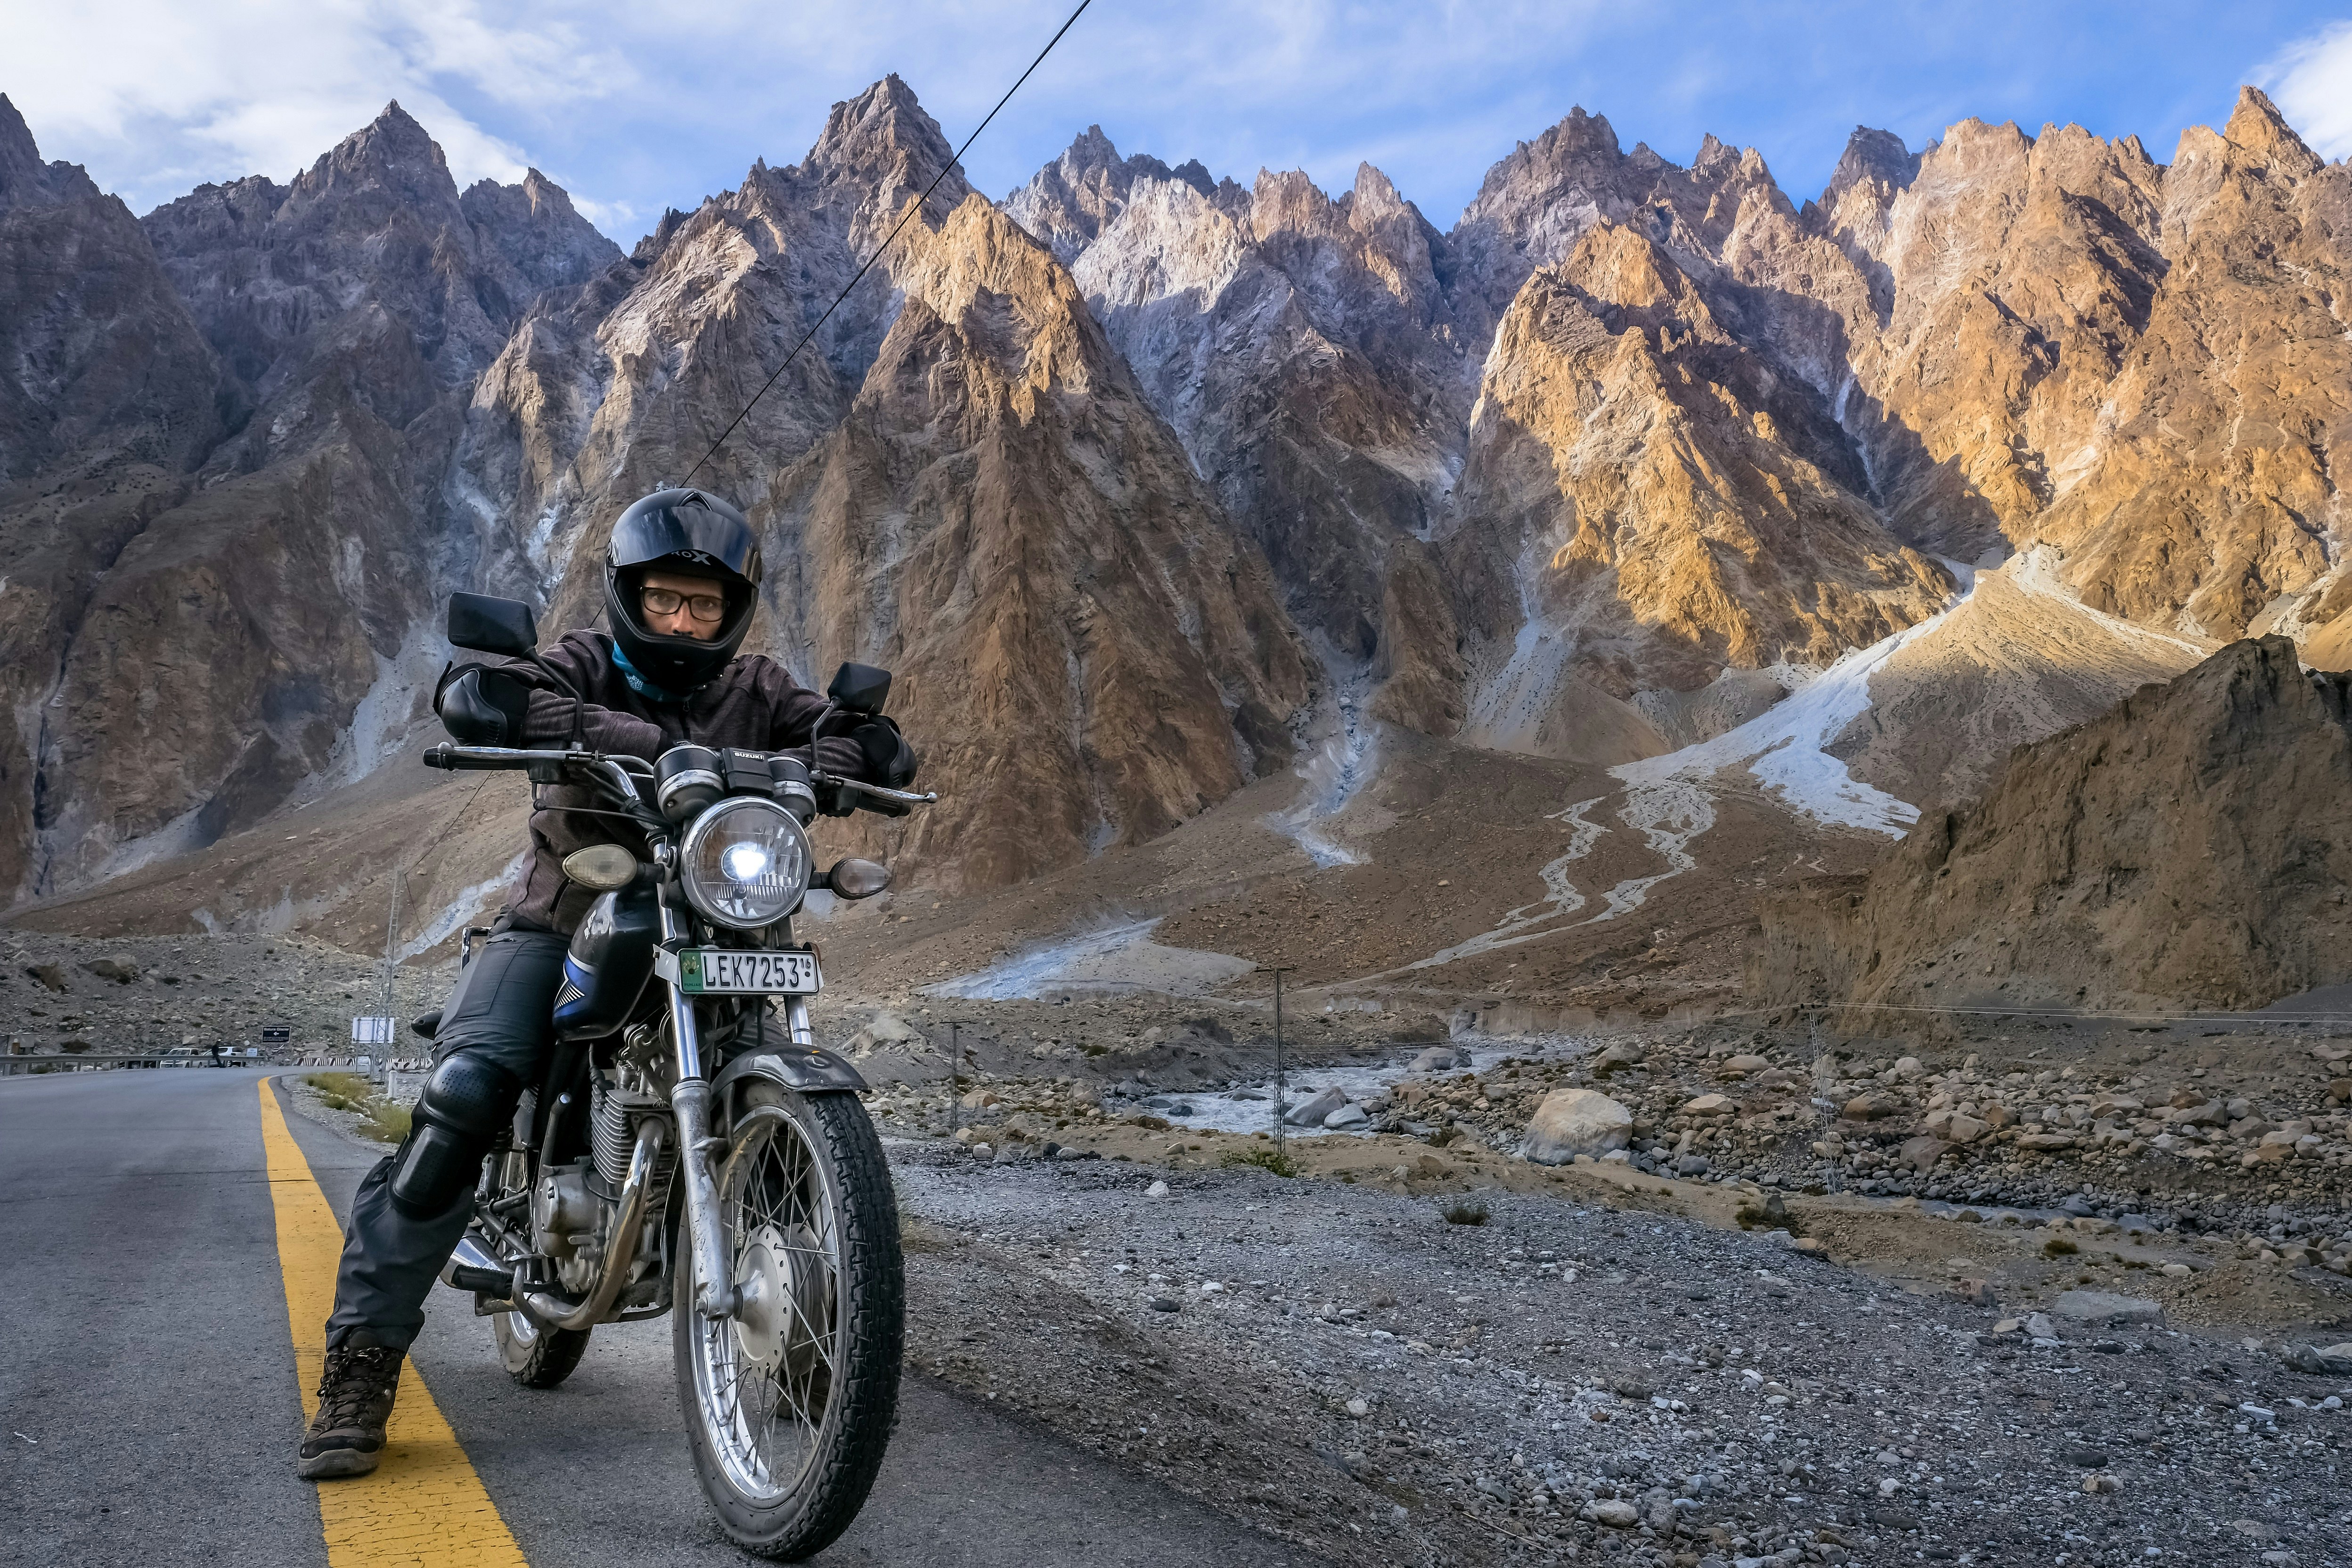 The author sits on his rented motorbike on the side of a road in Northern Pakistan. Behind him, a row of jagged mountain peaks are visible.